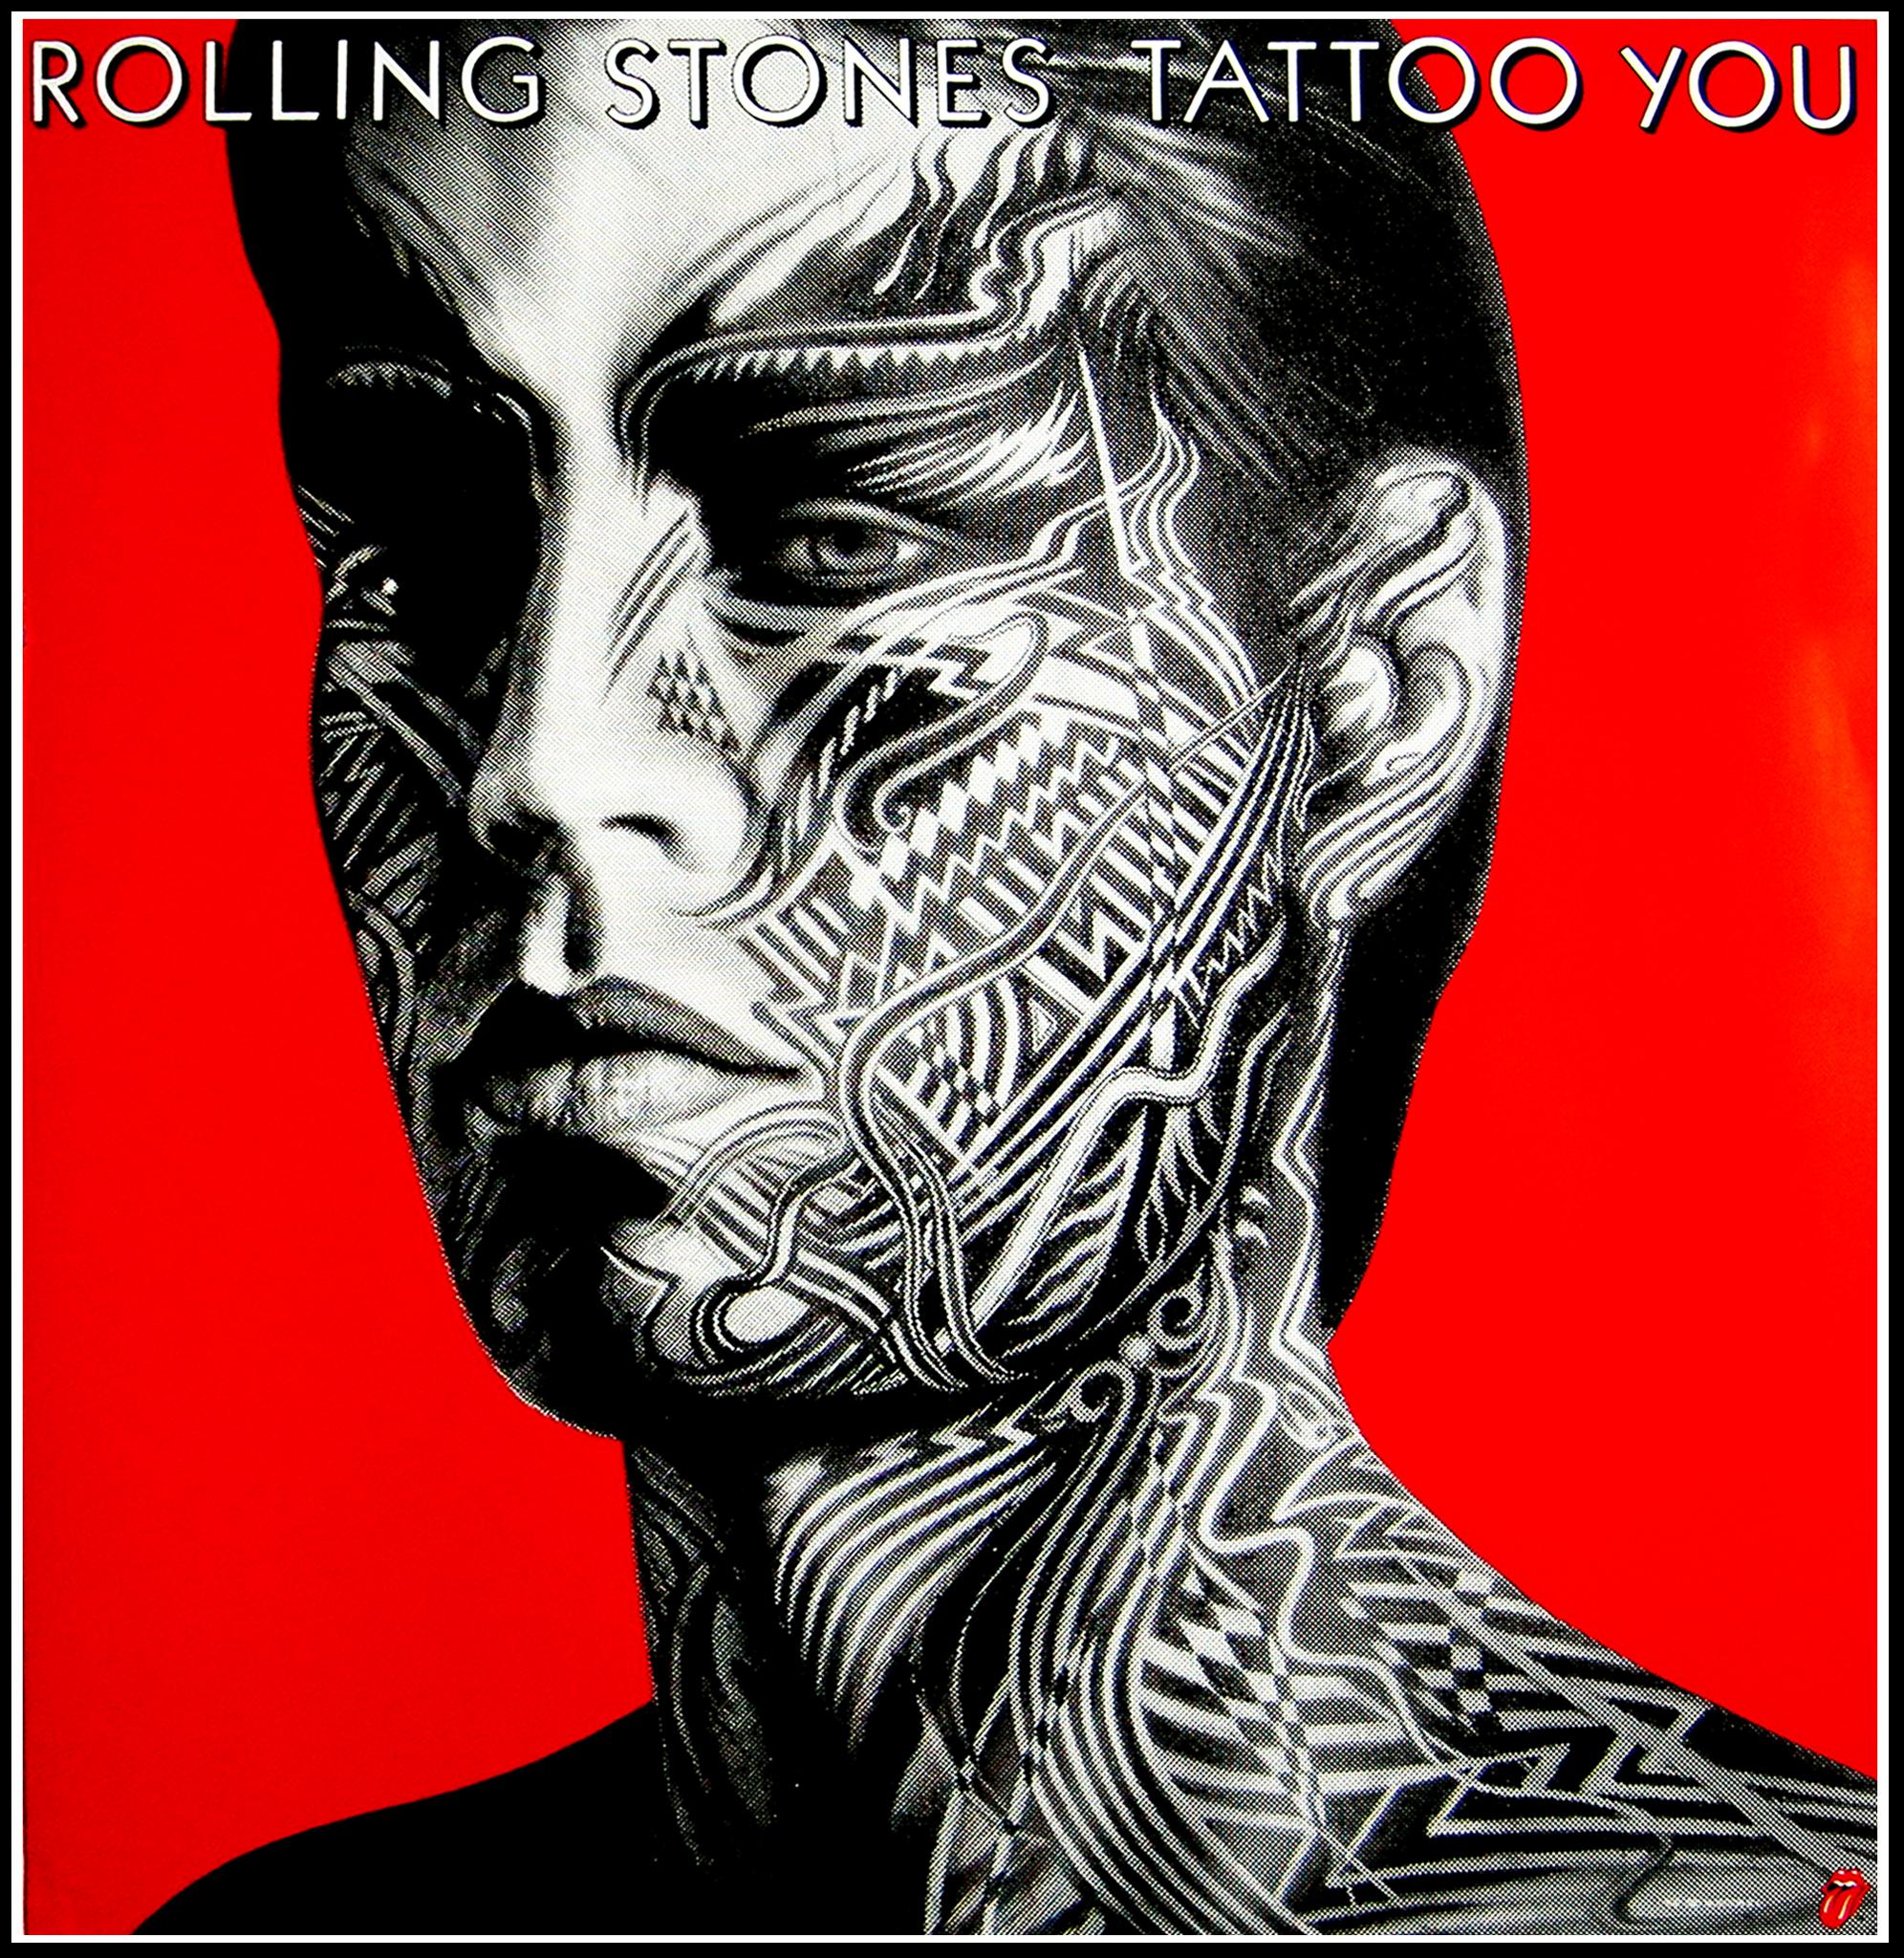 "Rolling Stones - Tattoo You (Mick Jagger)" Original Vintage Music Poster - Print by Peter Corriston